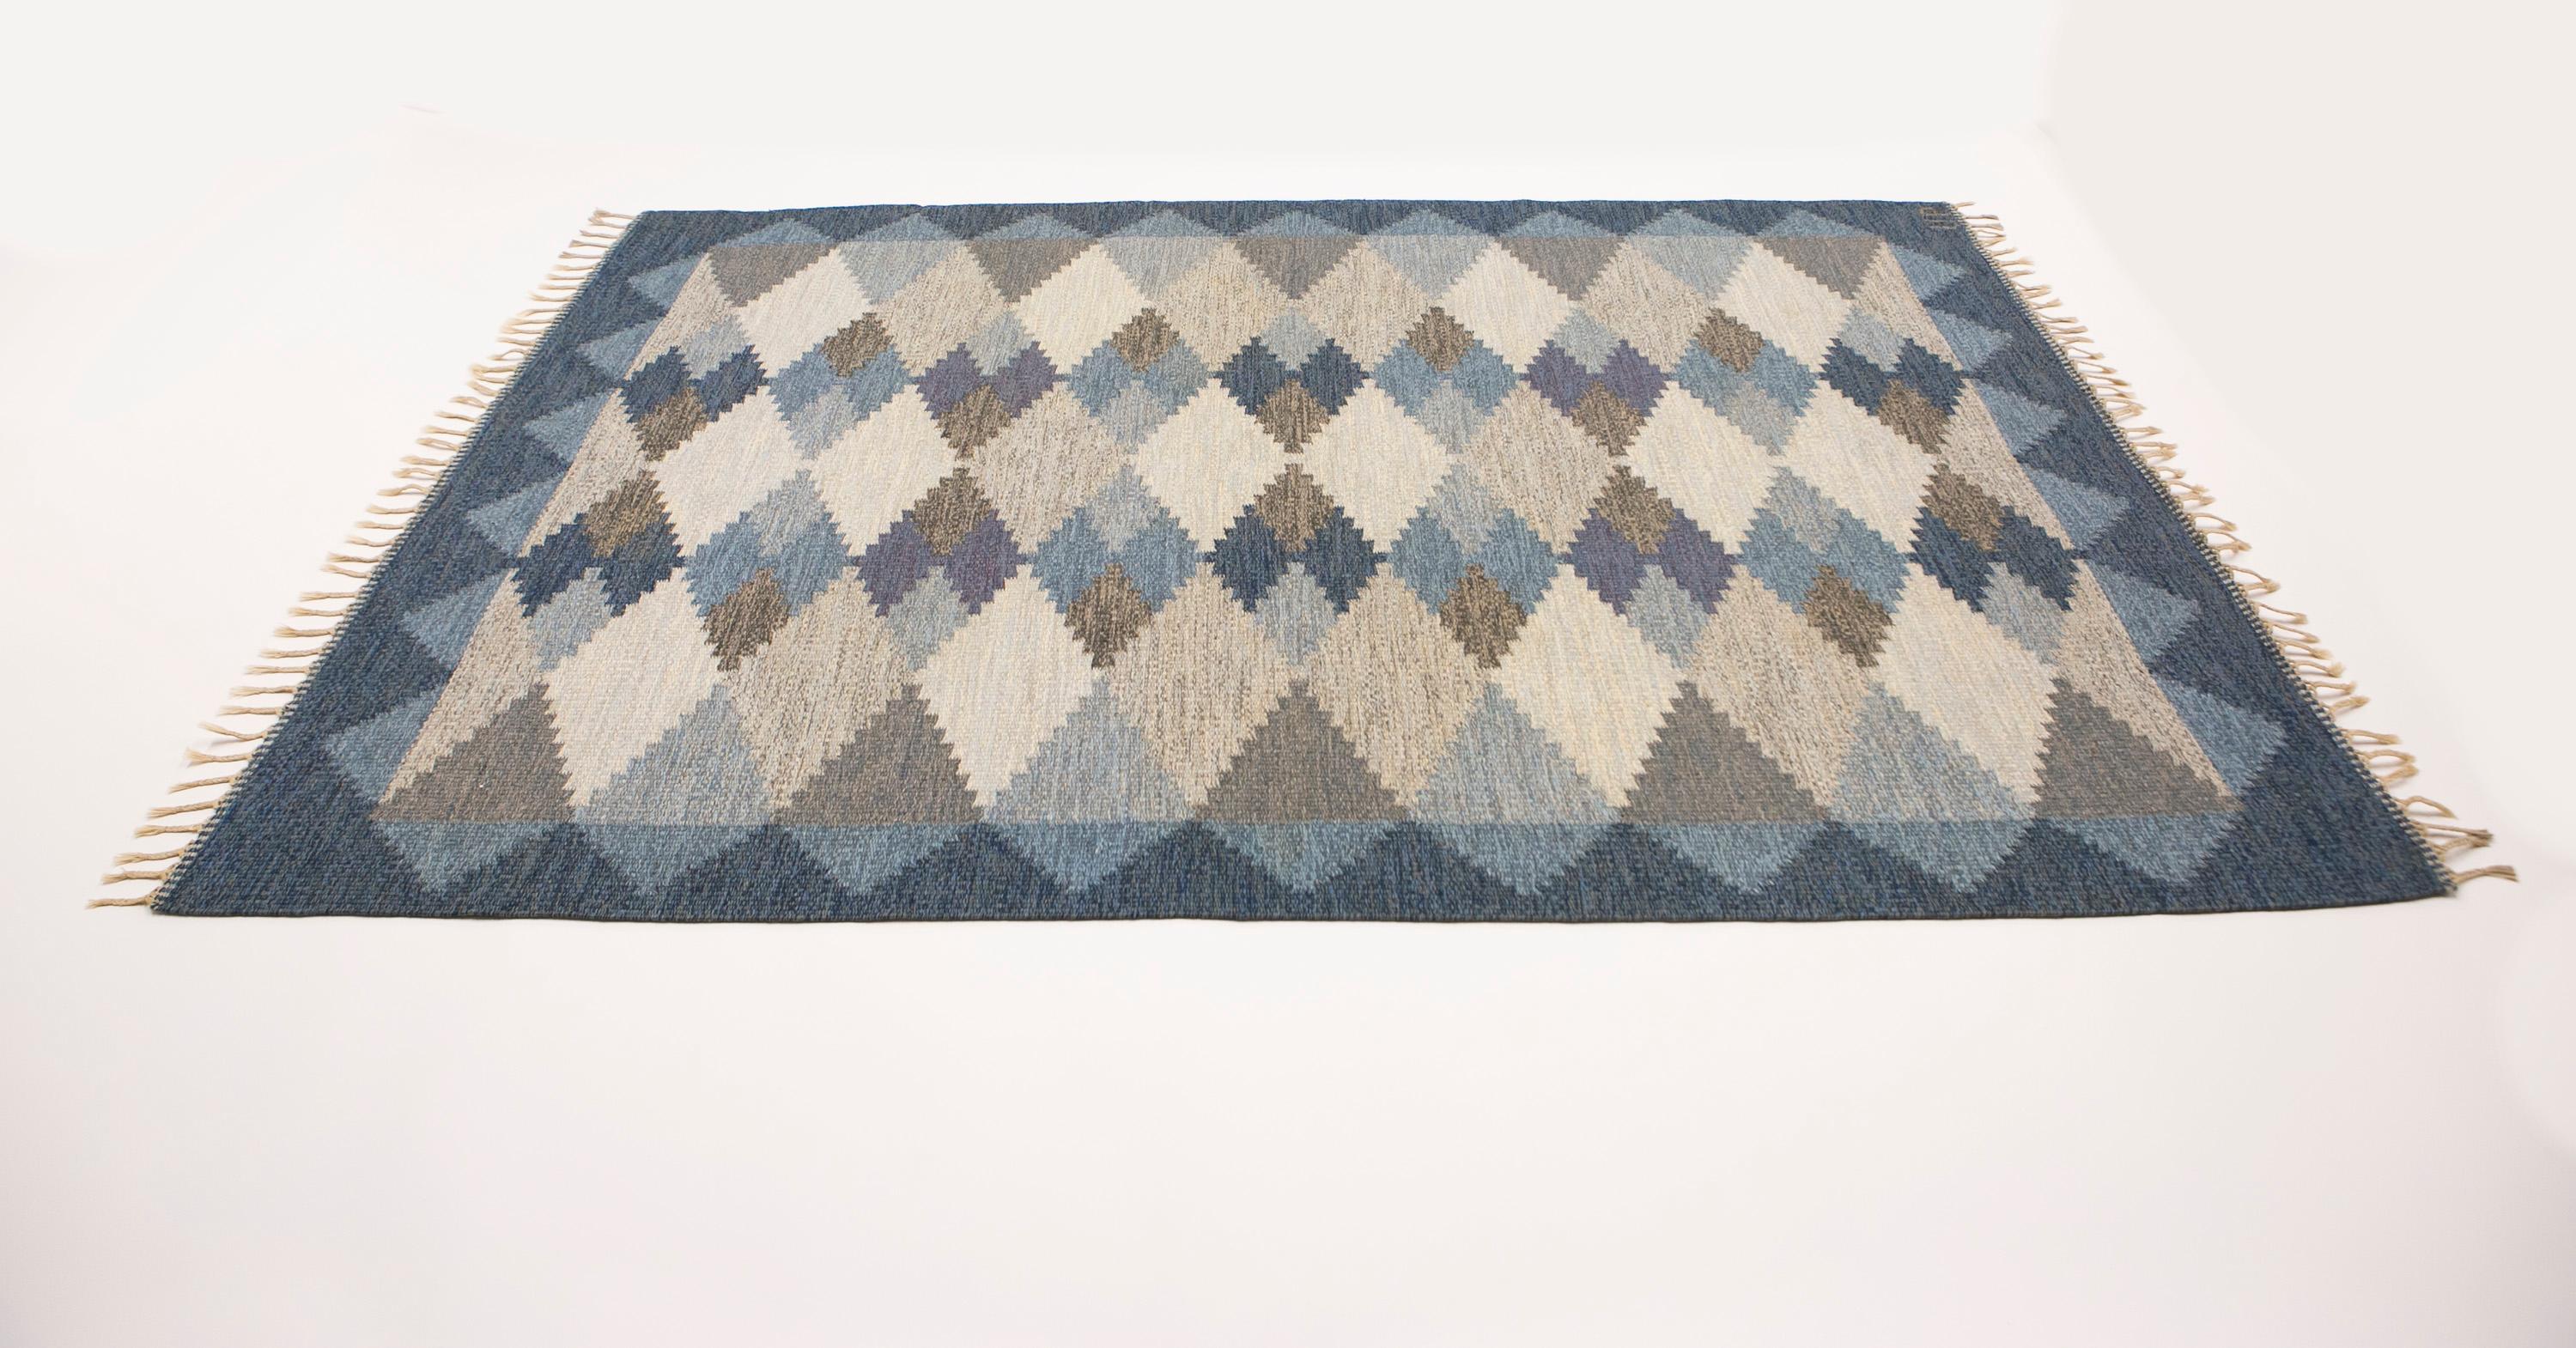  Ulla Parkdal Blue Grey Swedish Flat Weave Hand Woven Rug - Sweden, Swedish 1960 In Good Condition For Sale In Los Angeles, CA